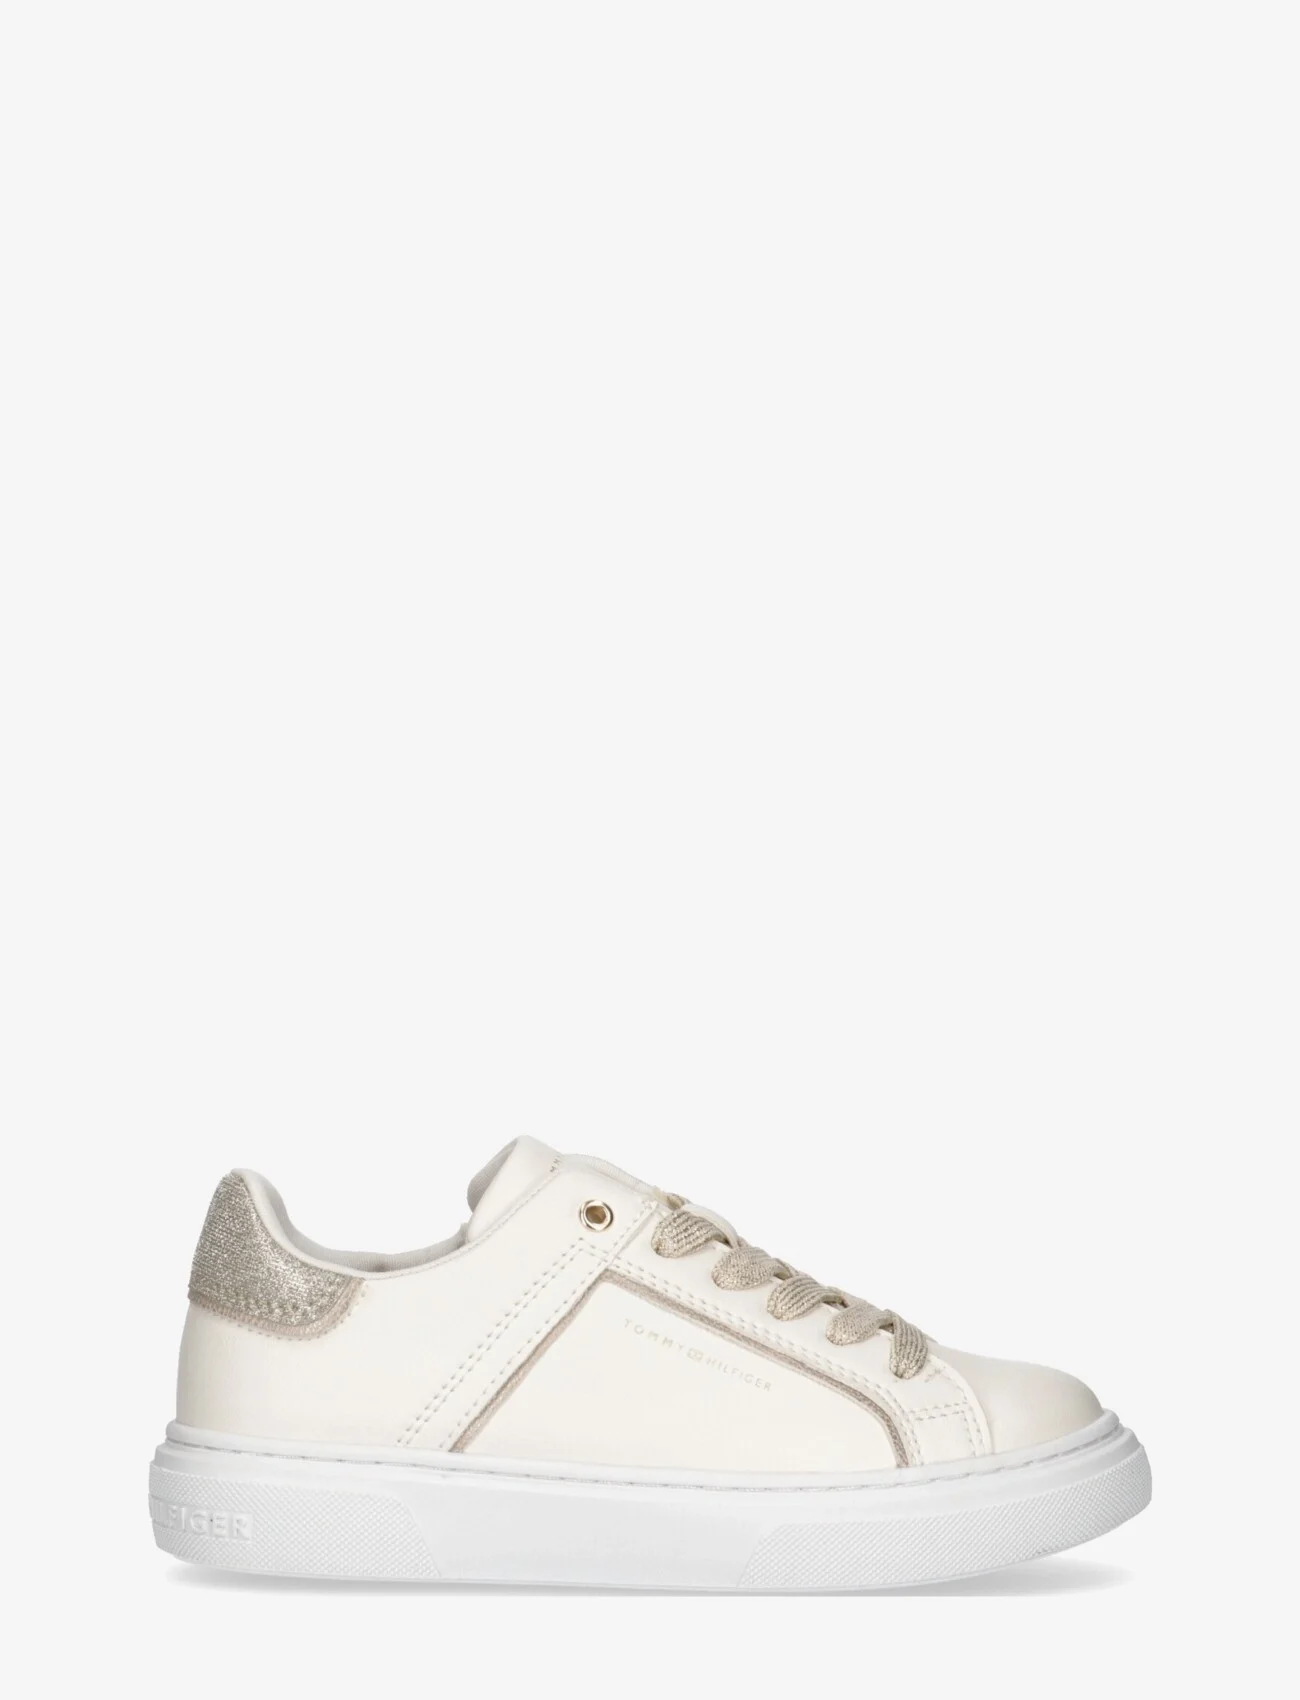 Tommy Hilfiger - LOW CUT LACE-UP SNEAKER - niedriger schnitt - off white/platinum - 1